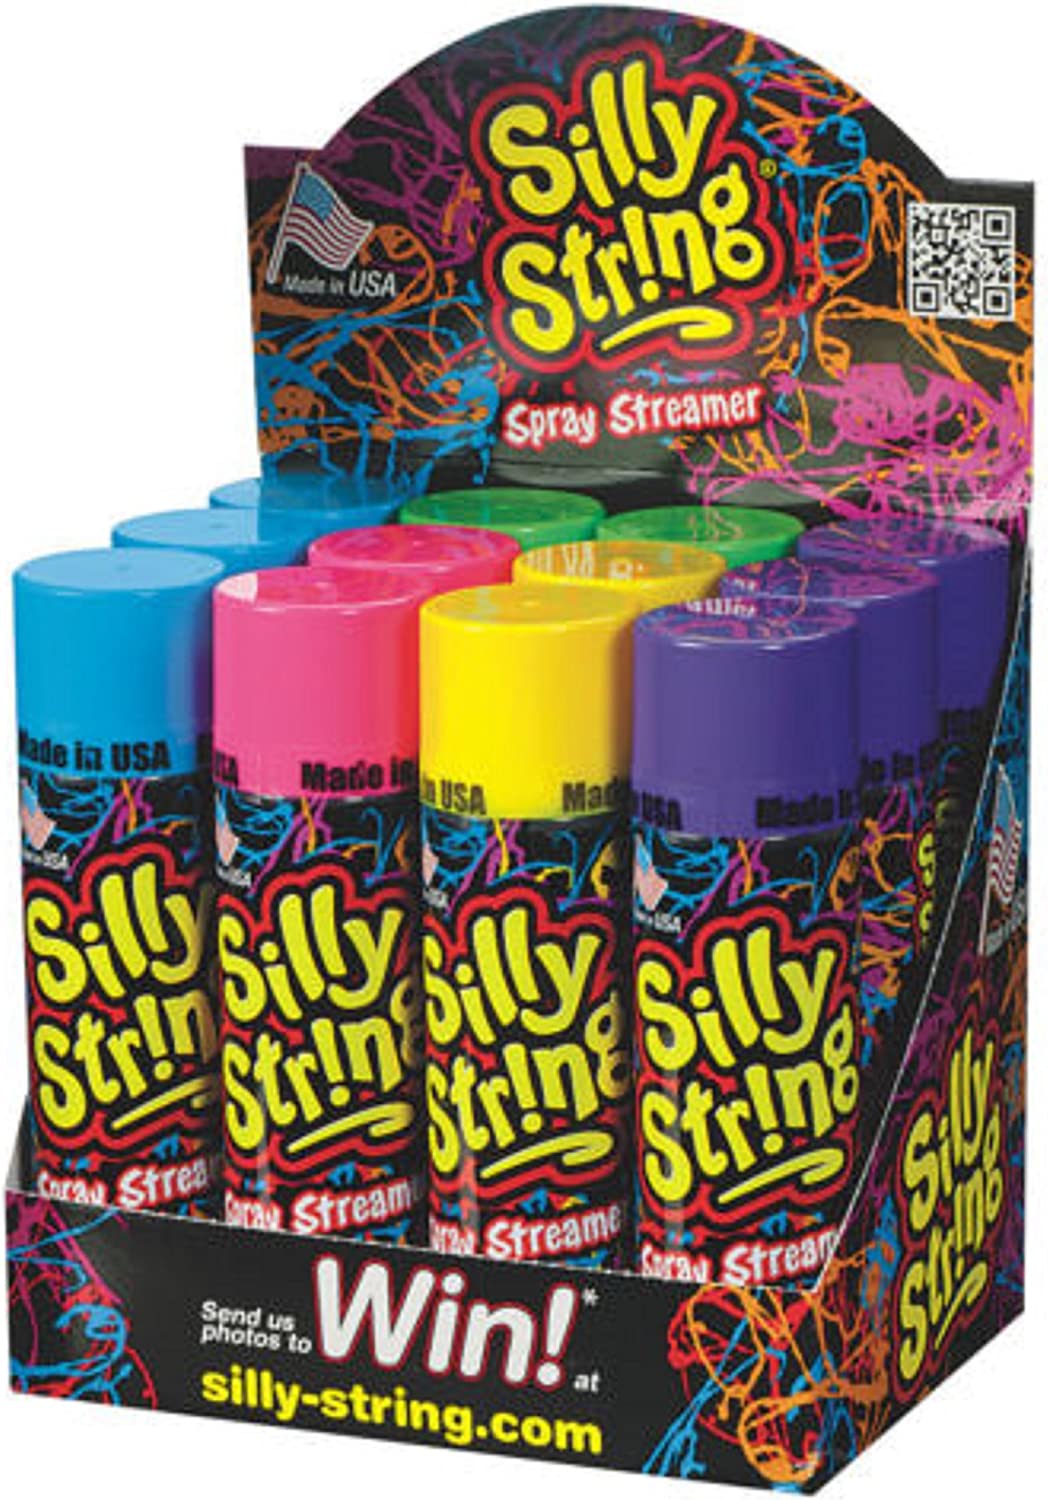 SCENTOS SCENTED SILLY STRING